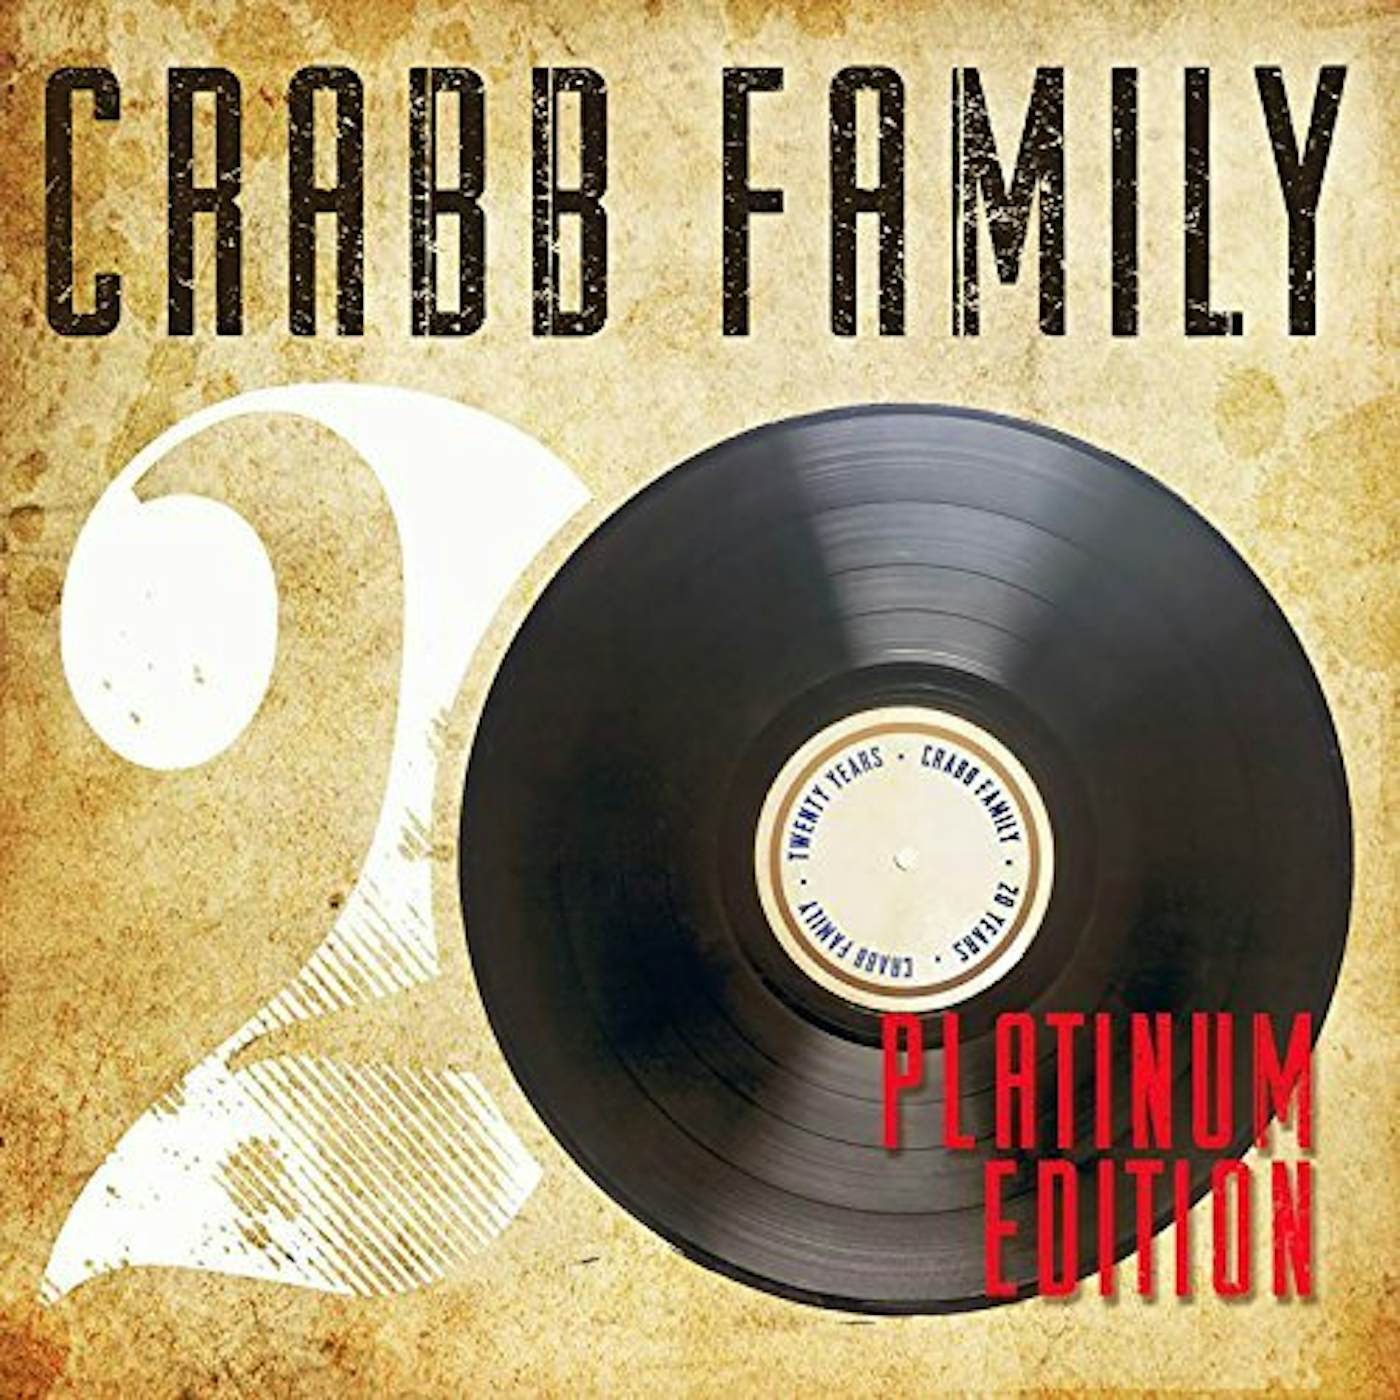 The Crabb Family 20 YEARS PLATINUM EDITION CD